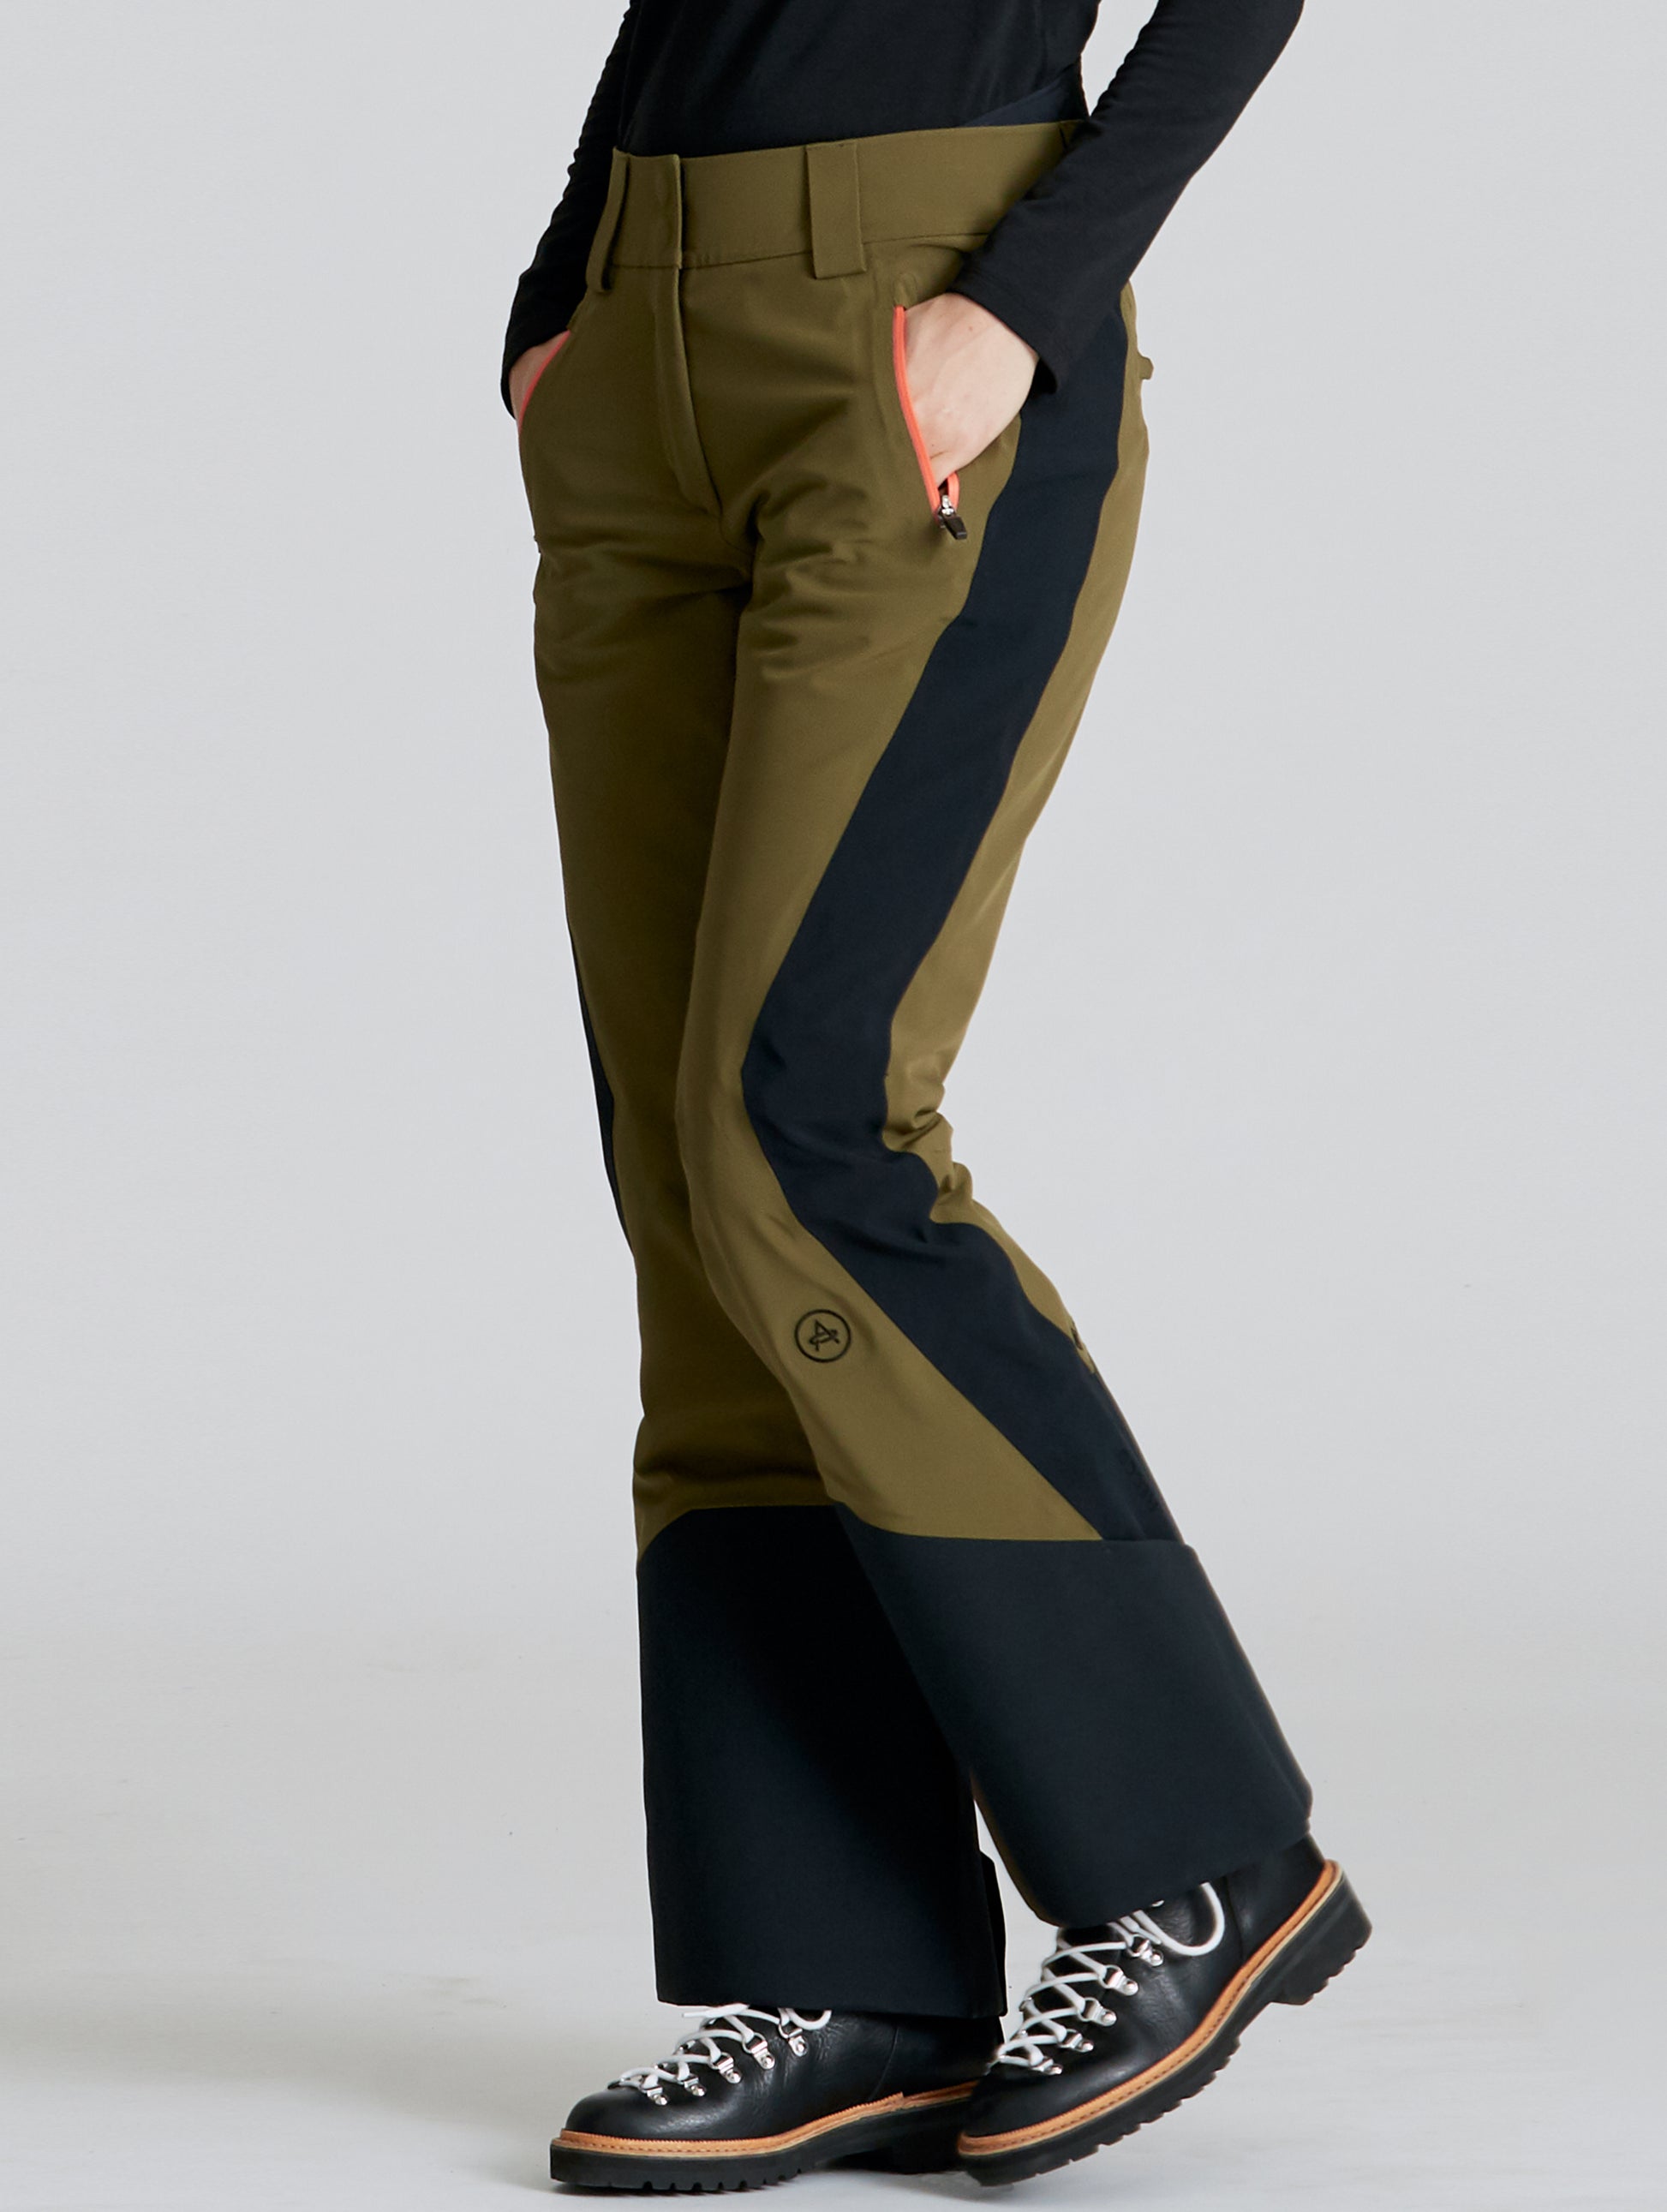 women's green snow pant from AETHER Apparel